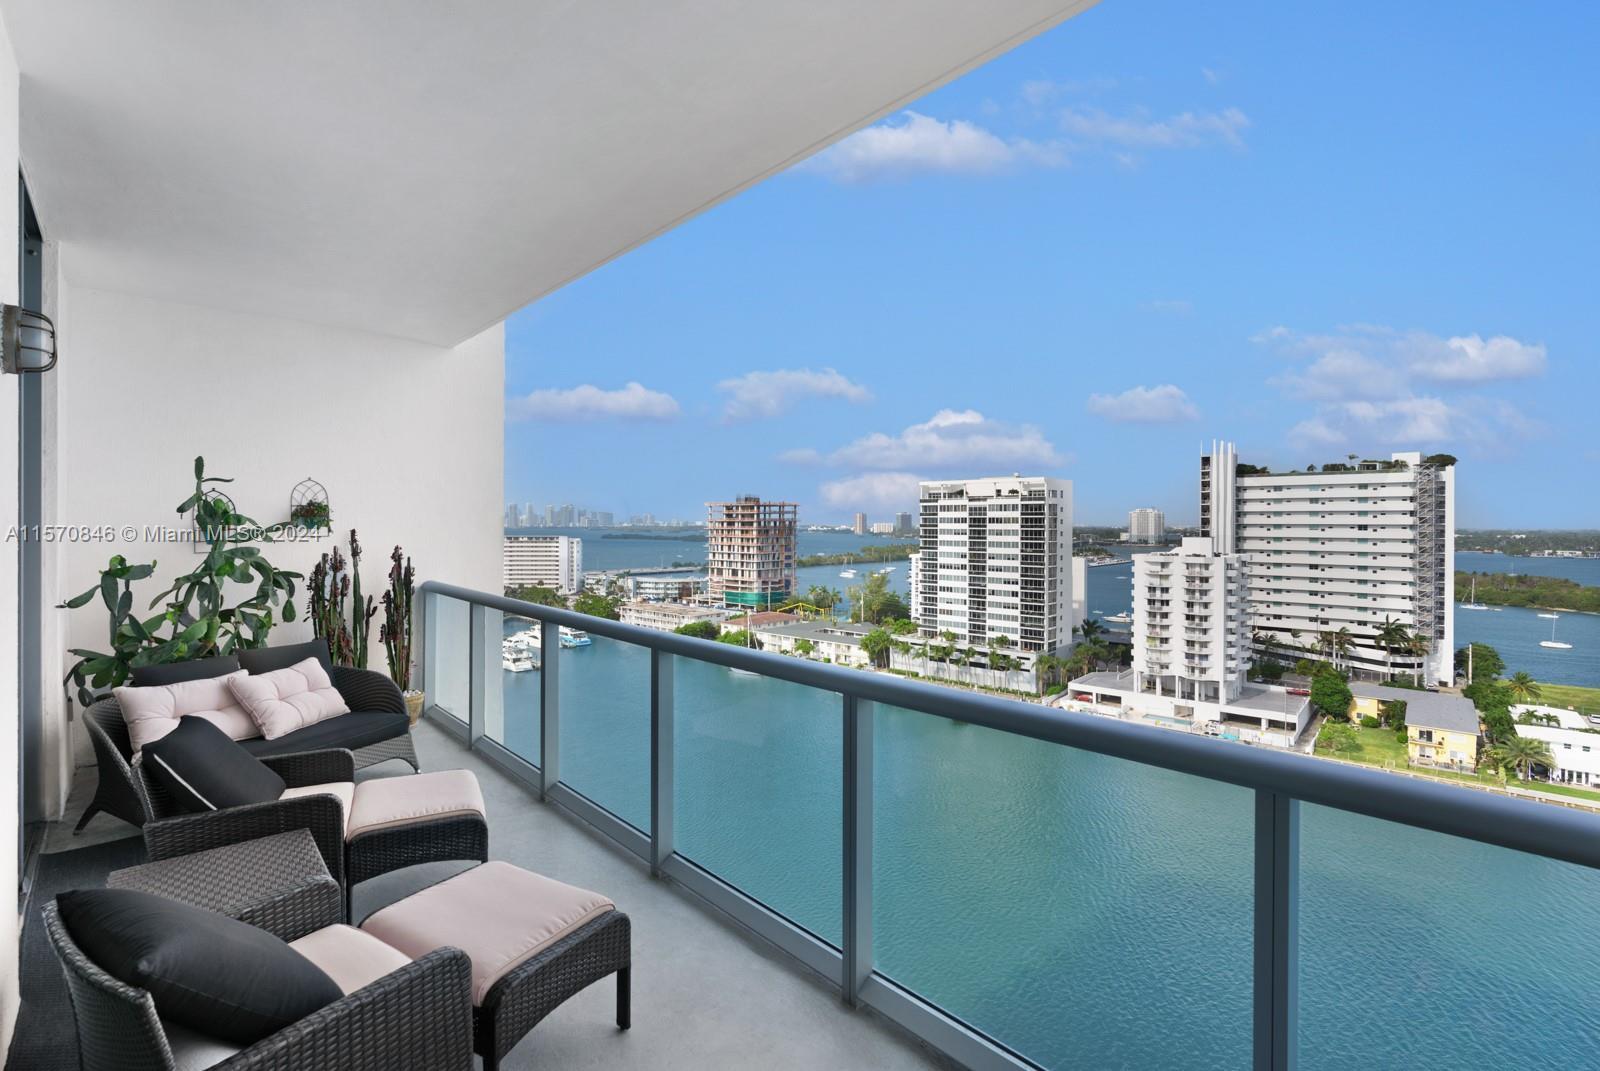 Live well in one of the most trending waterfront neighborhoods in South Florida - North Bay Village.